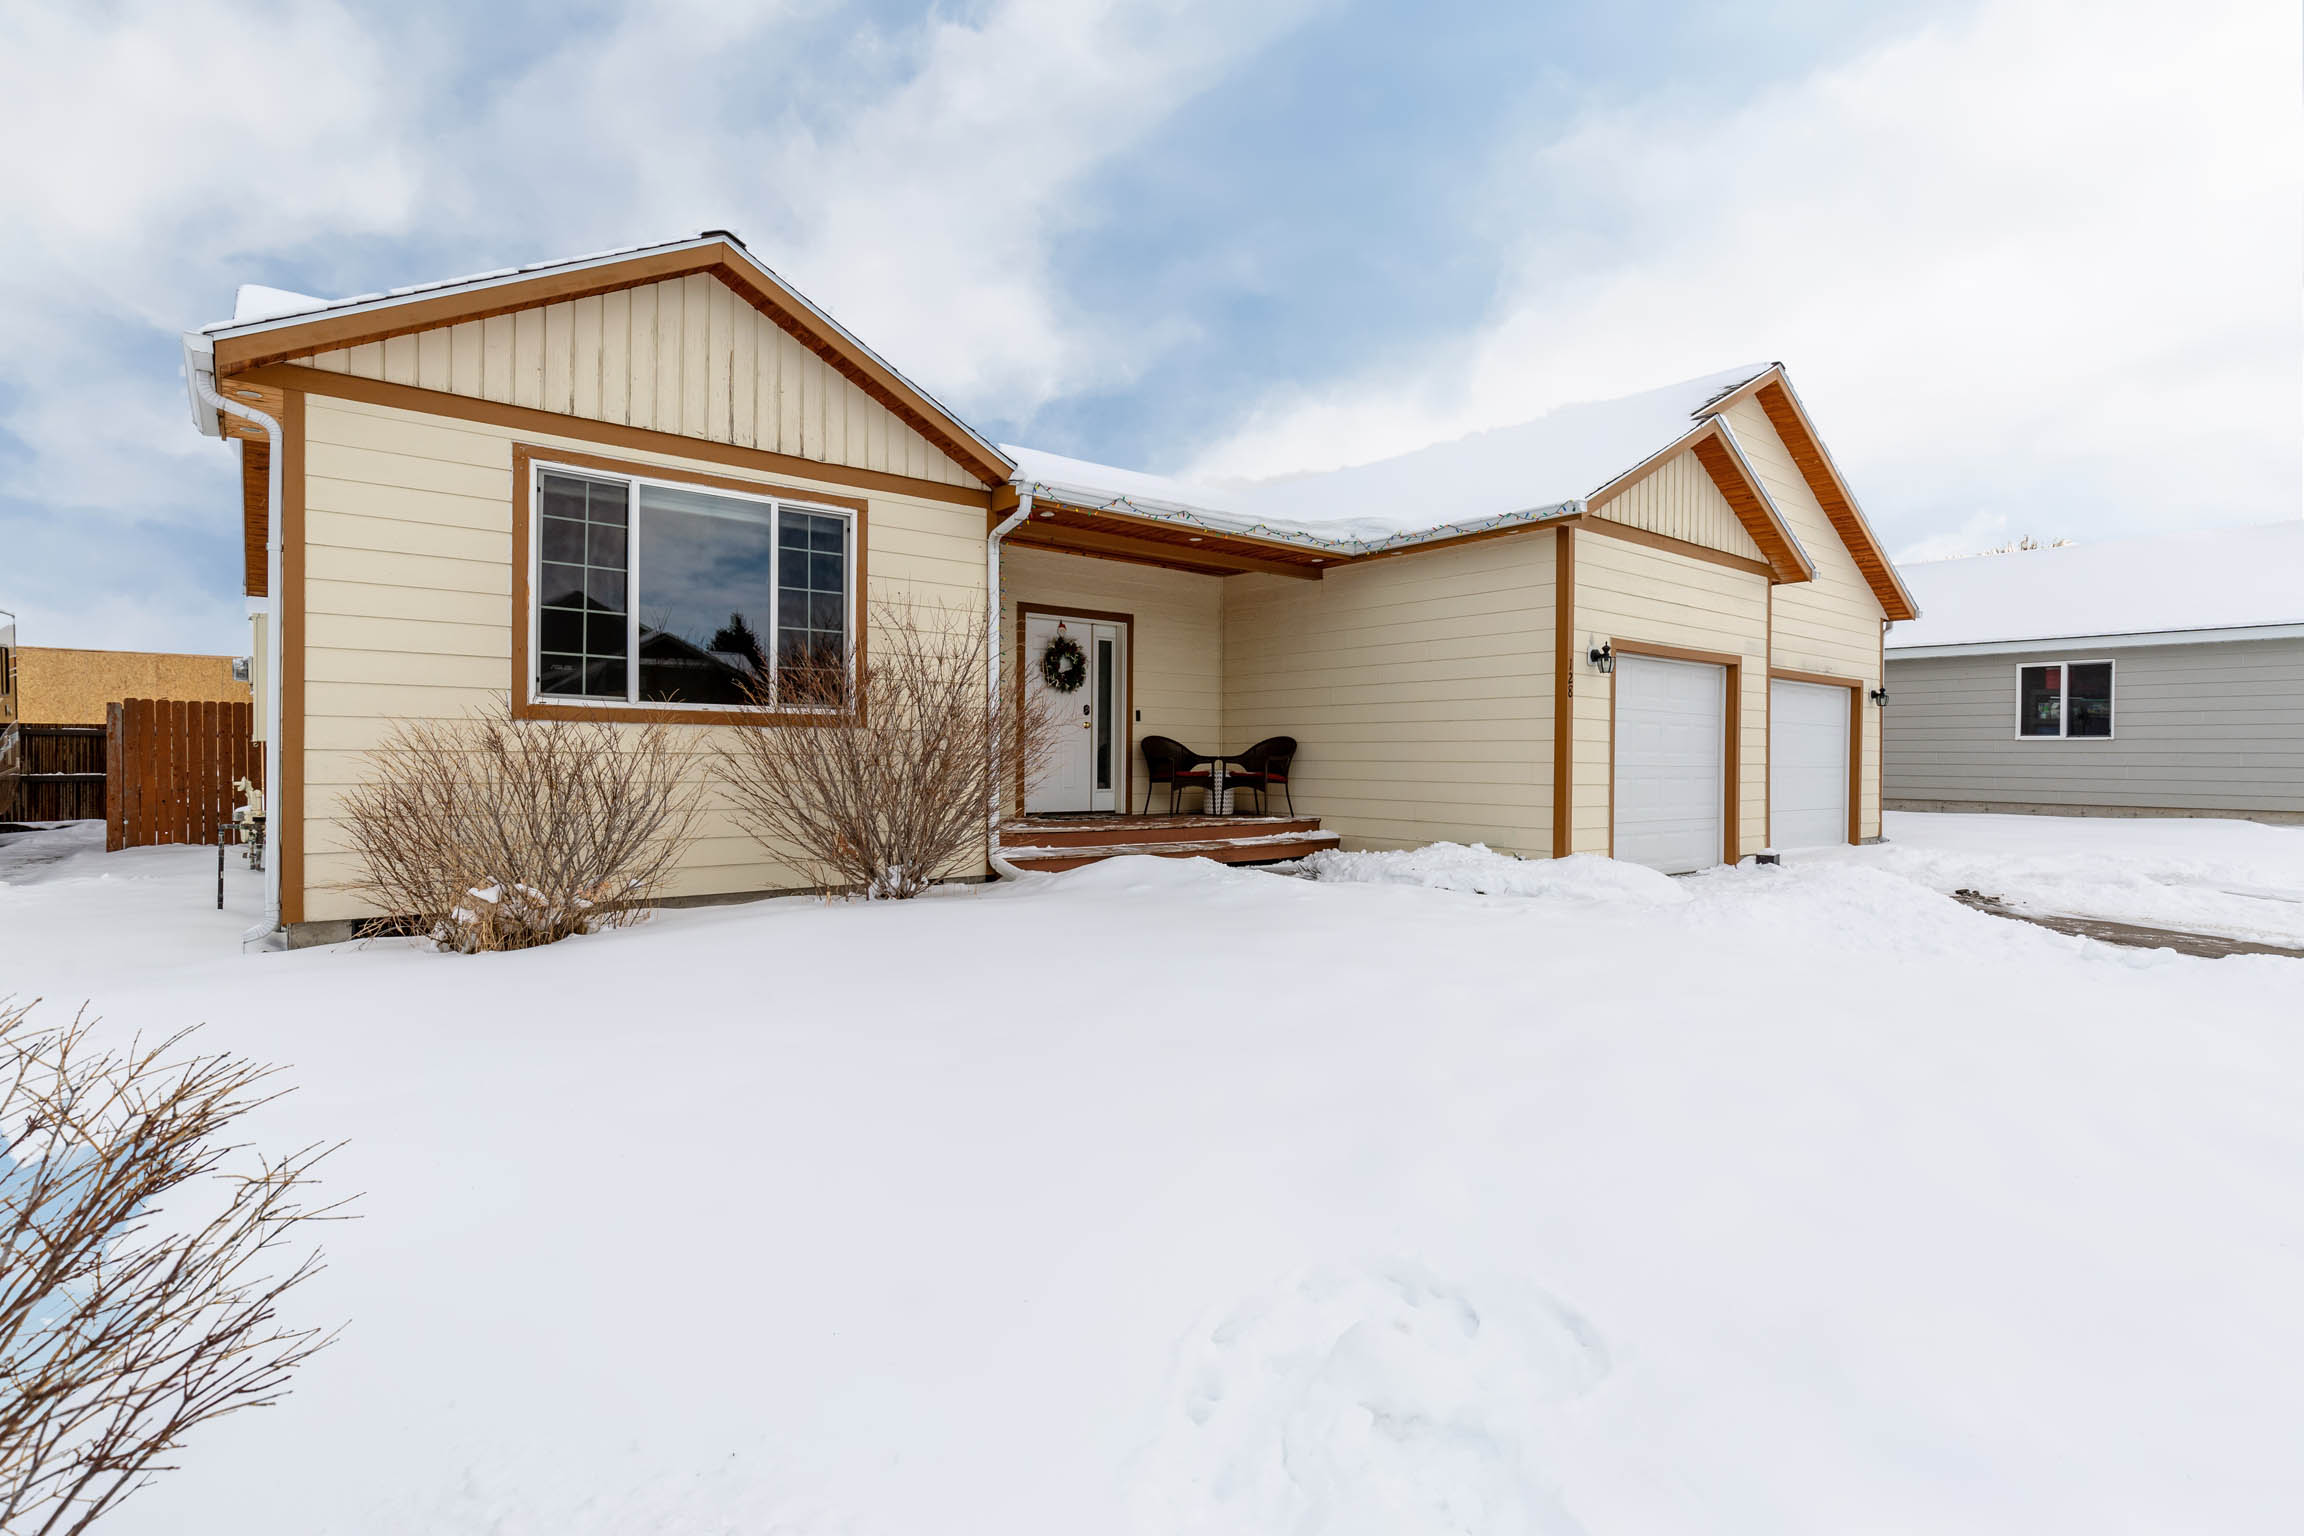 New Listing! Adorable Single Level Home in Bozeman